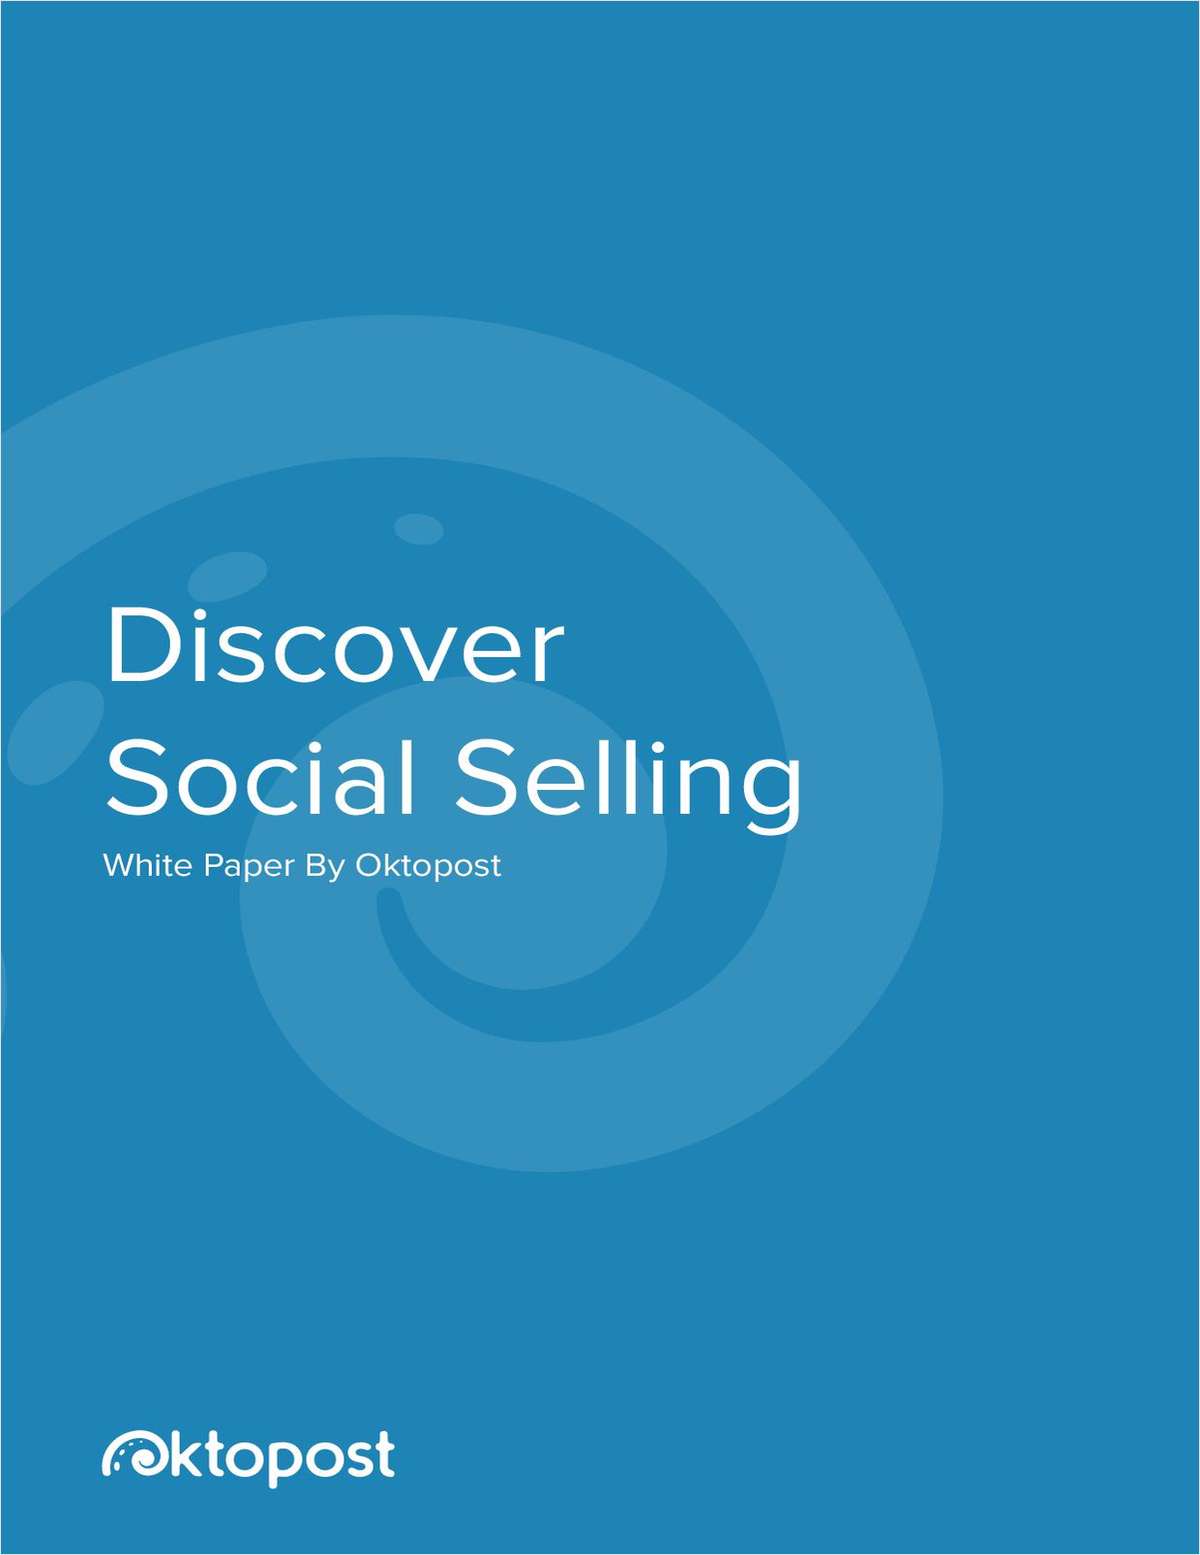 Discover Social Selling